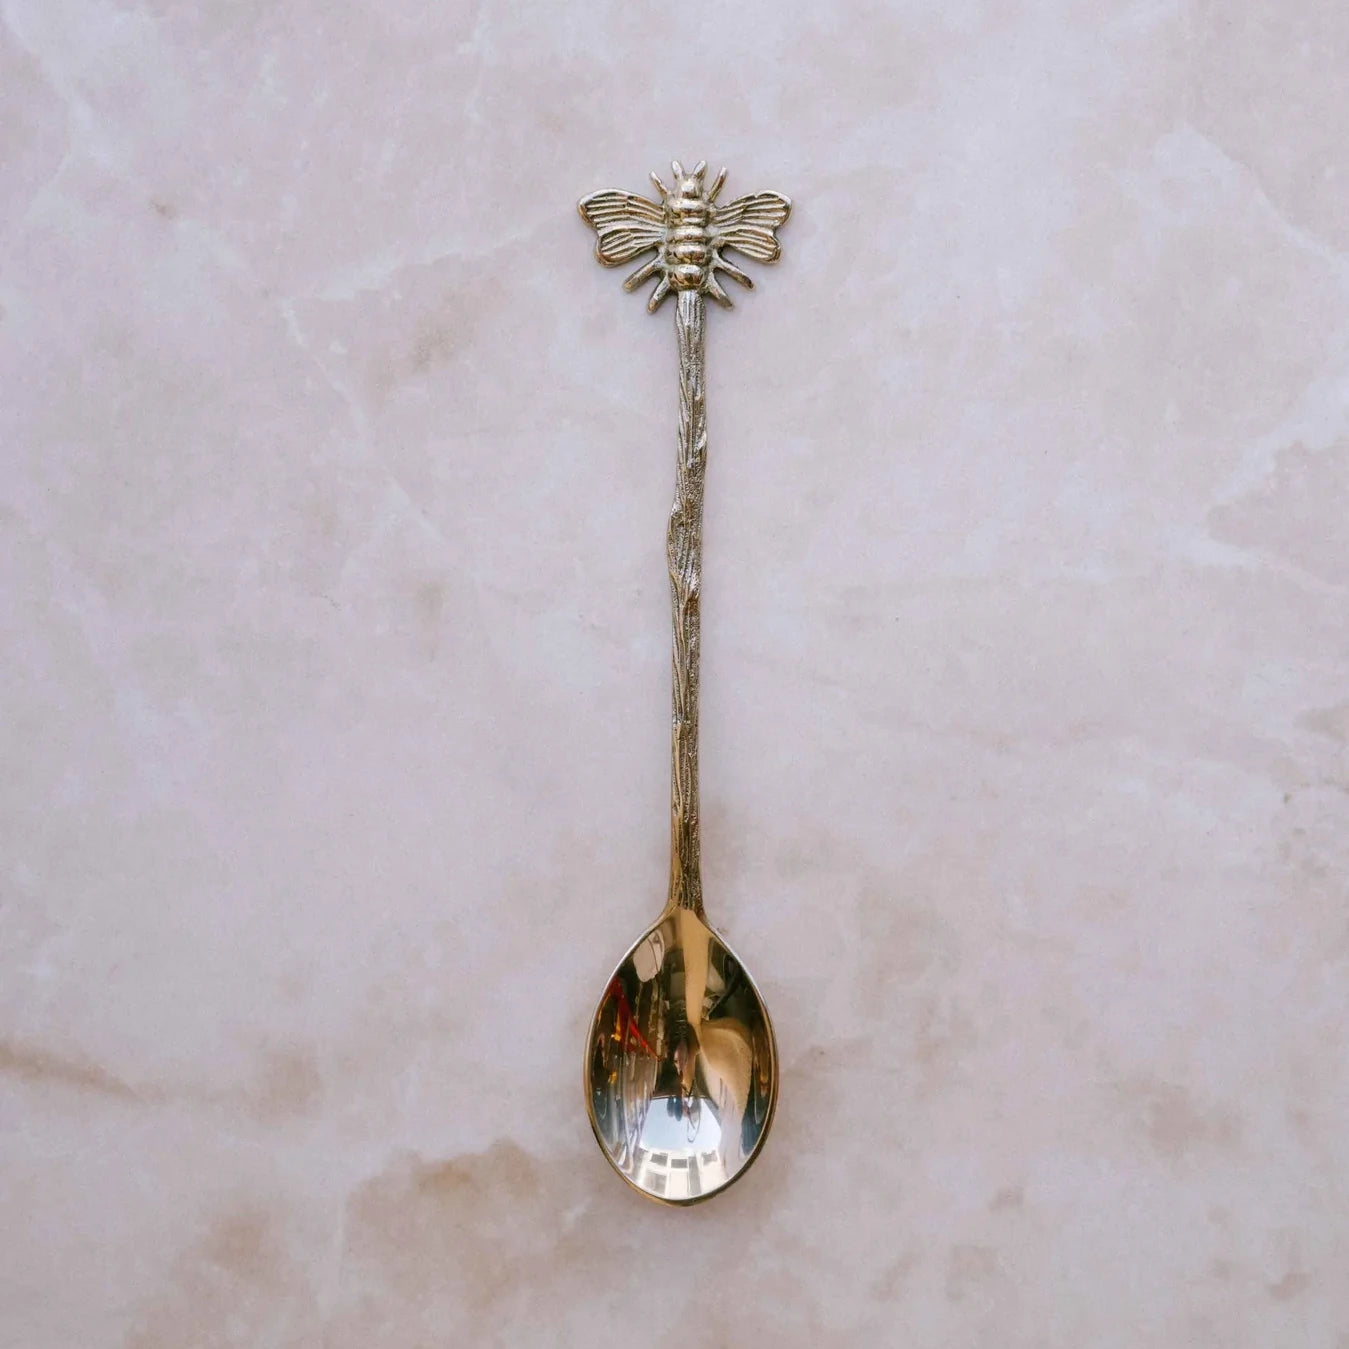 Brass Dessert Spoons by The Wholesome Store - Bee